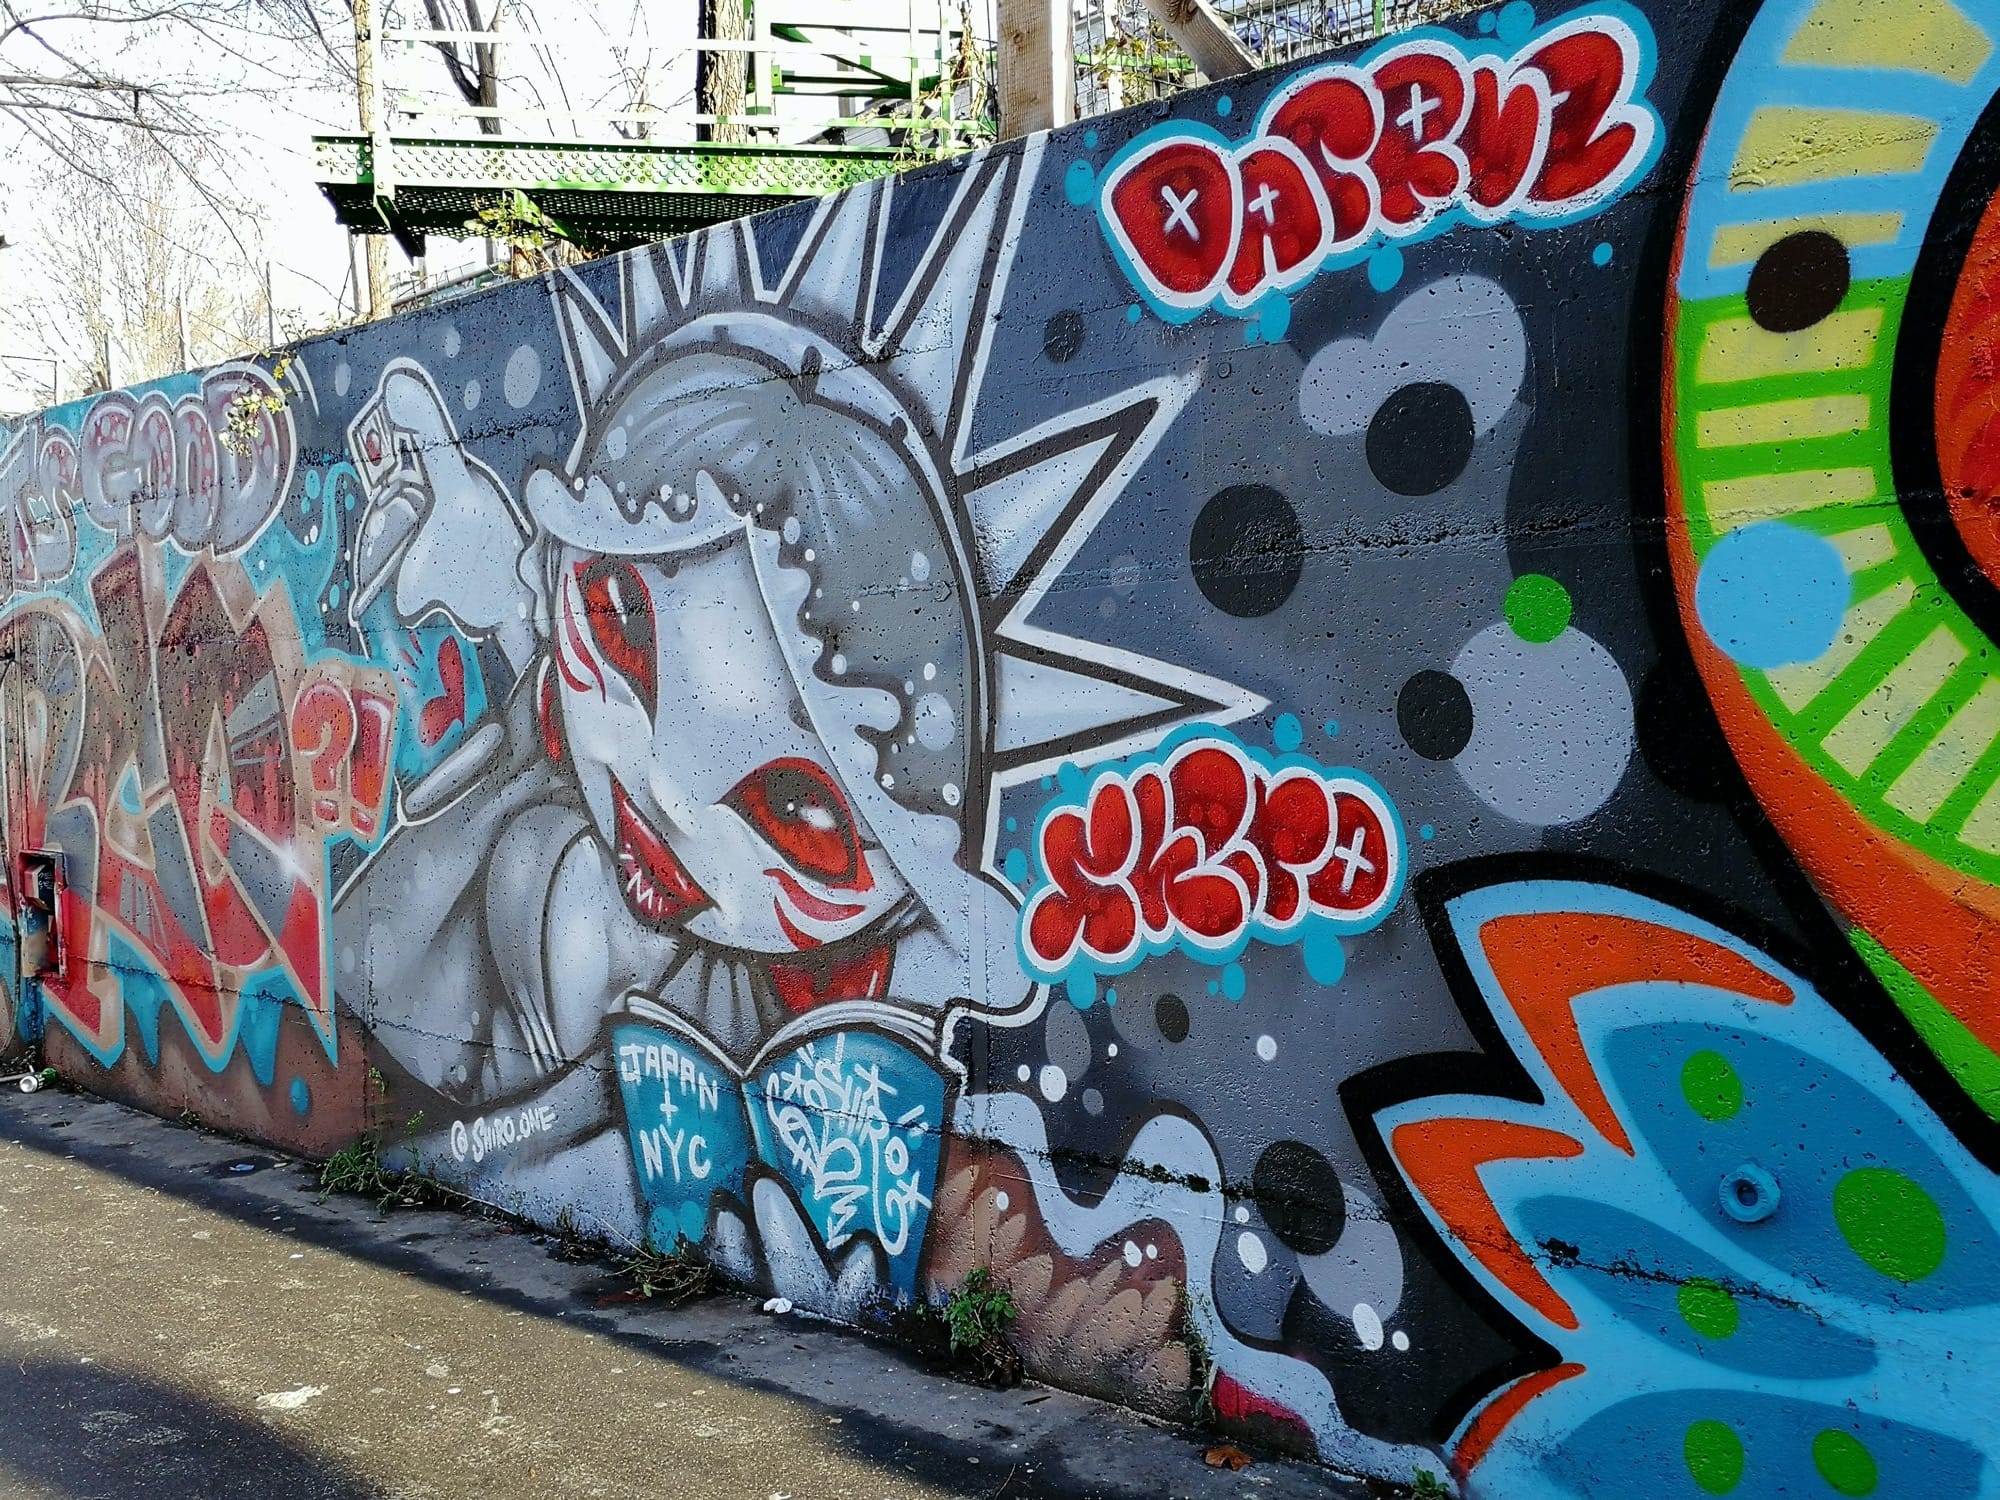 Graffiti 720  by the artist Shiro captured by Rabot in Paris France